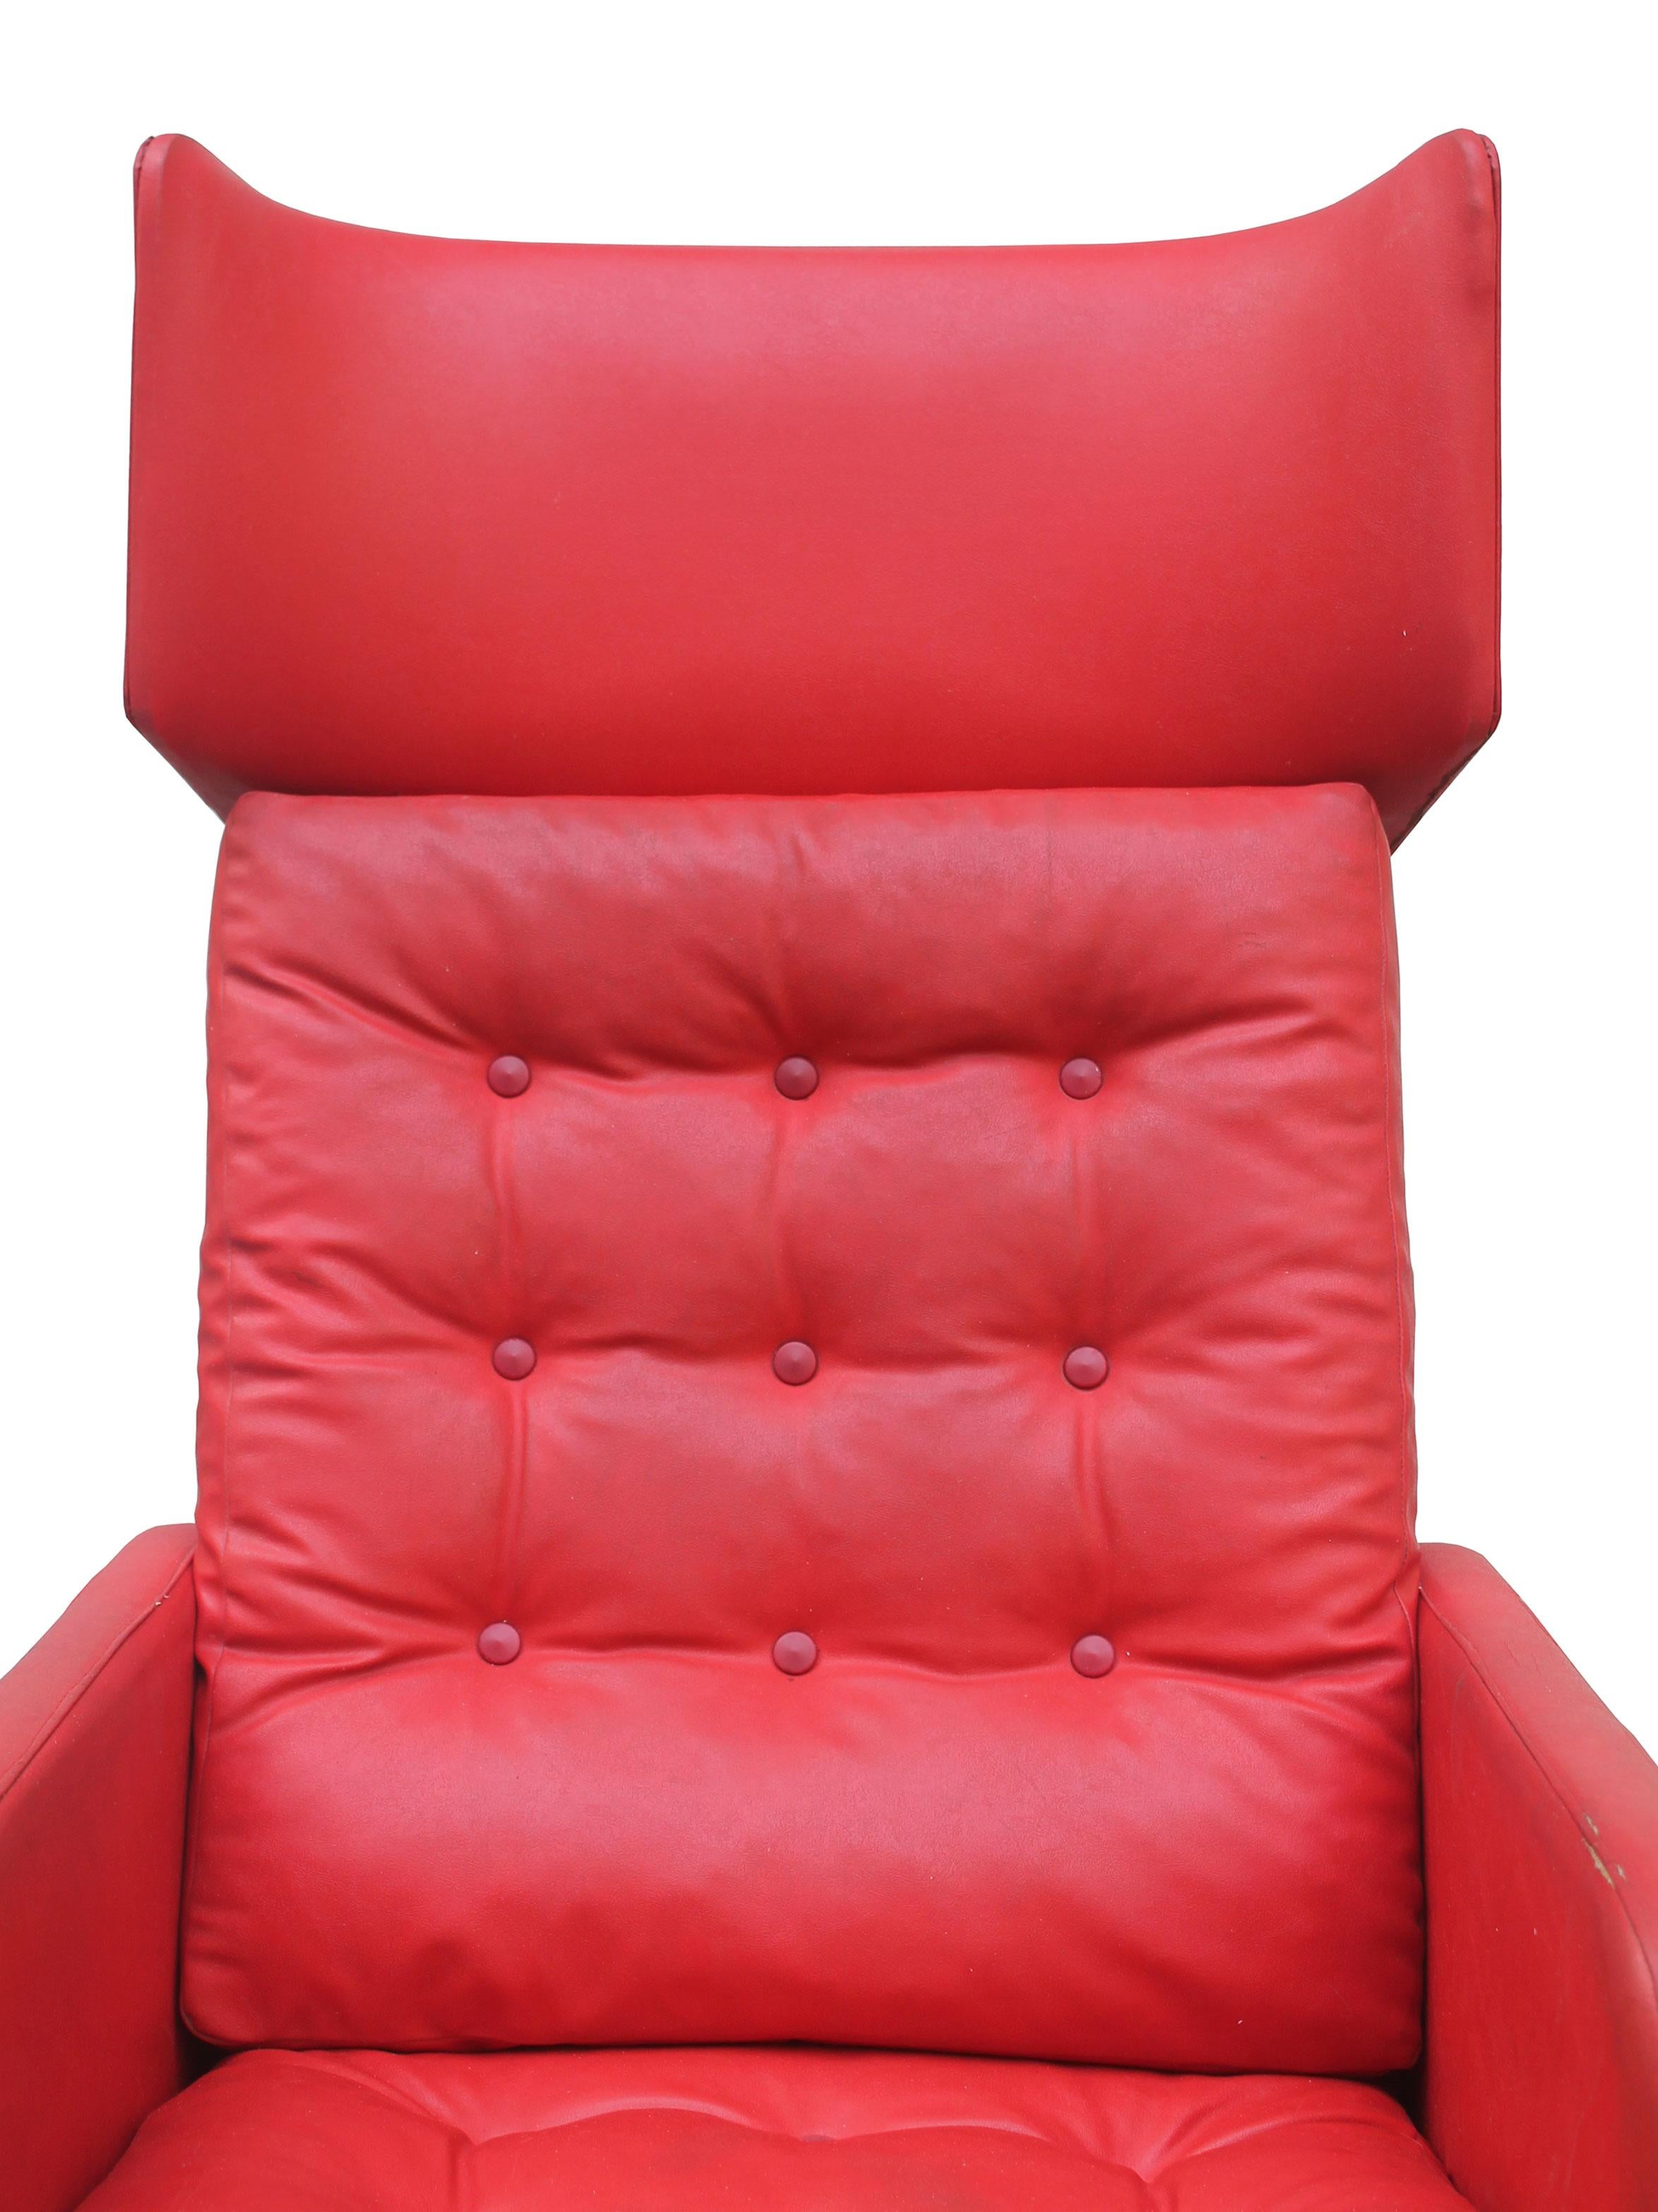 1970s Red Leather Swivel Armchair For Sale 5